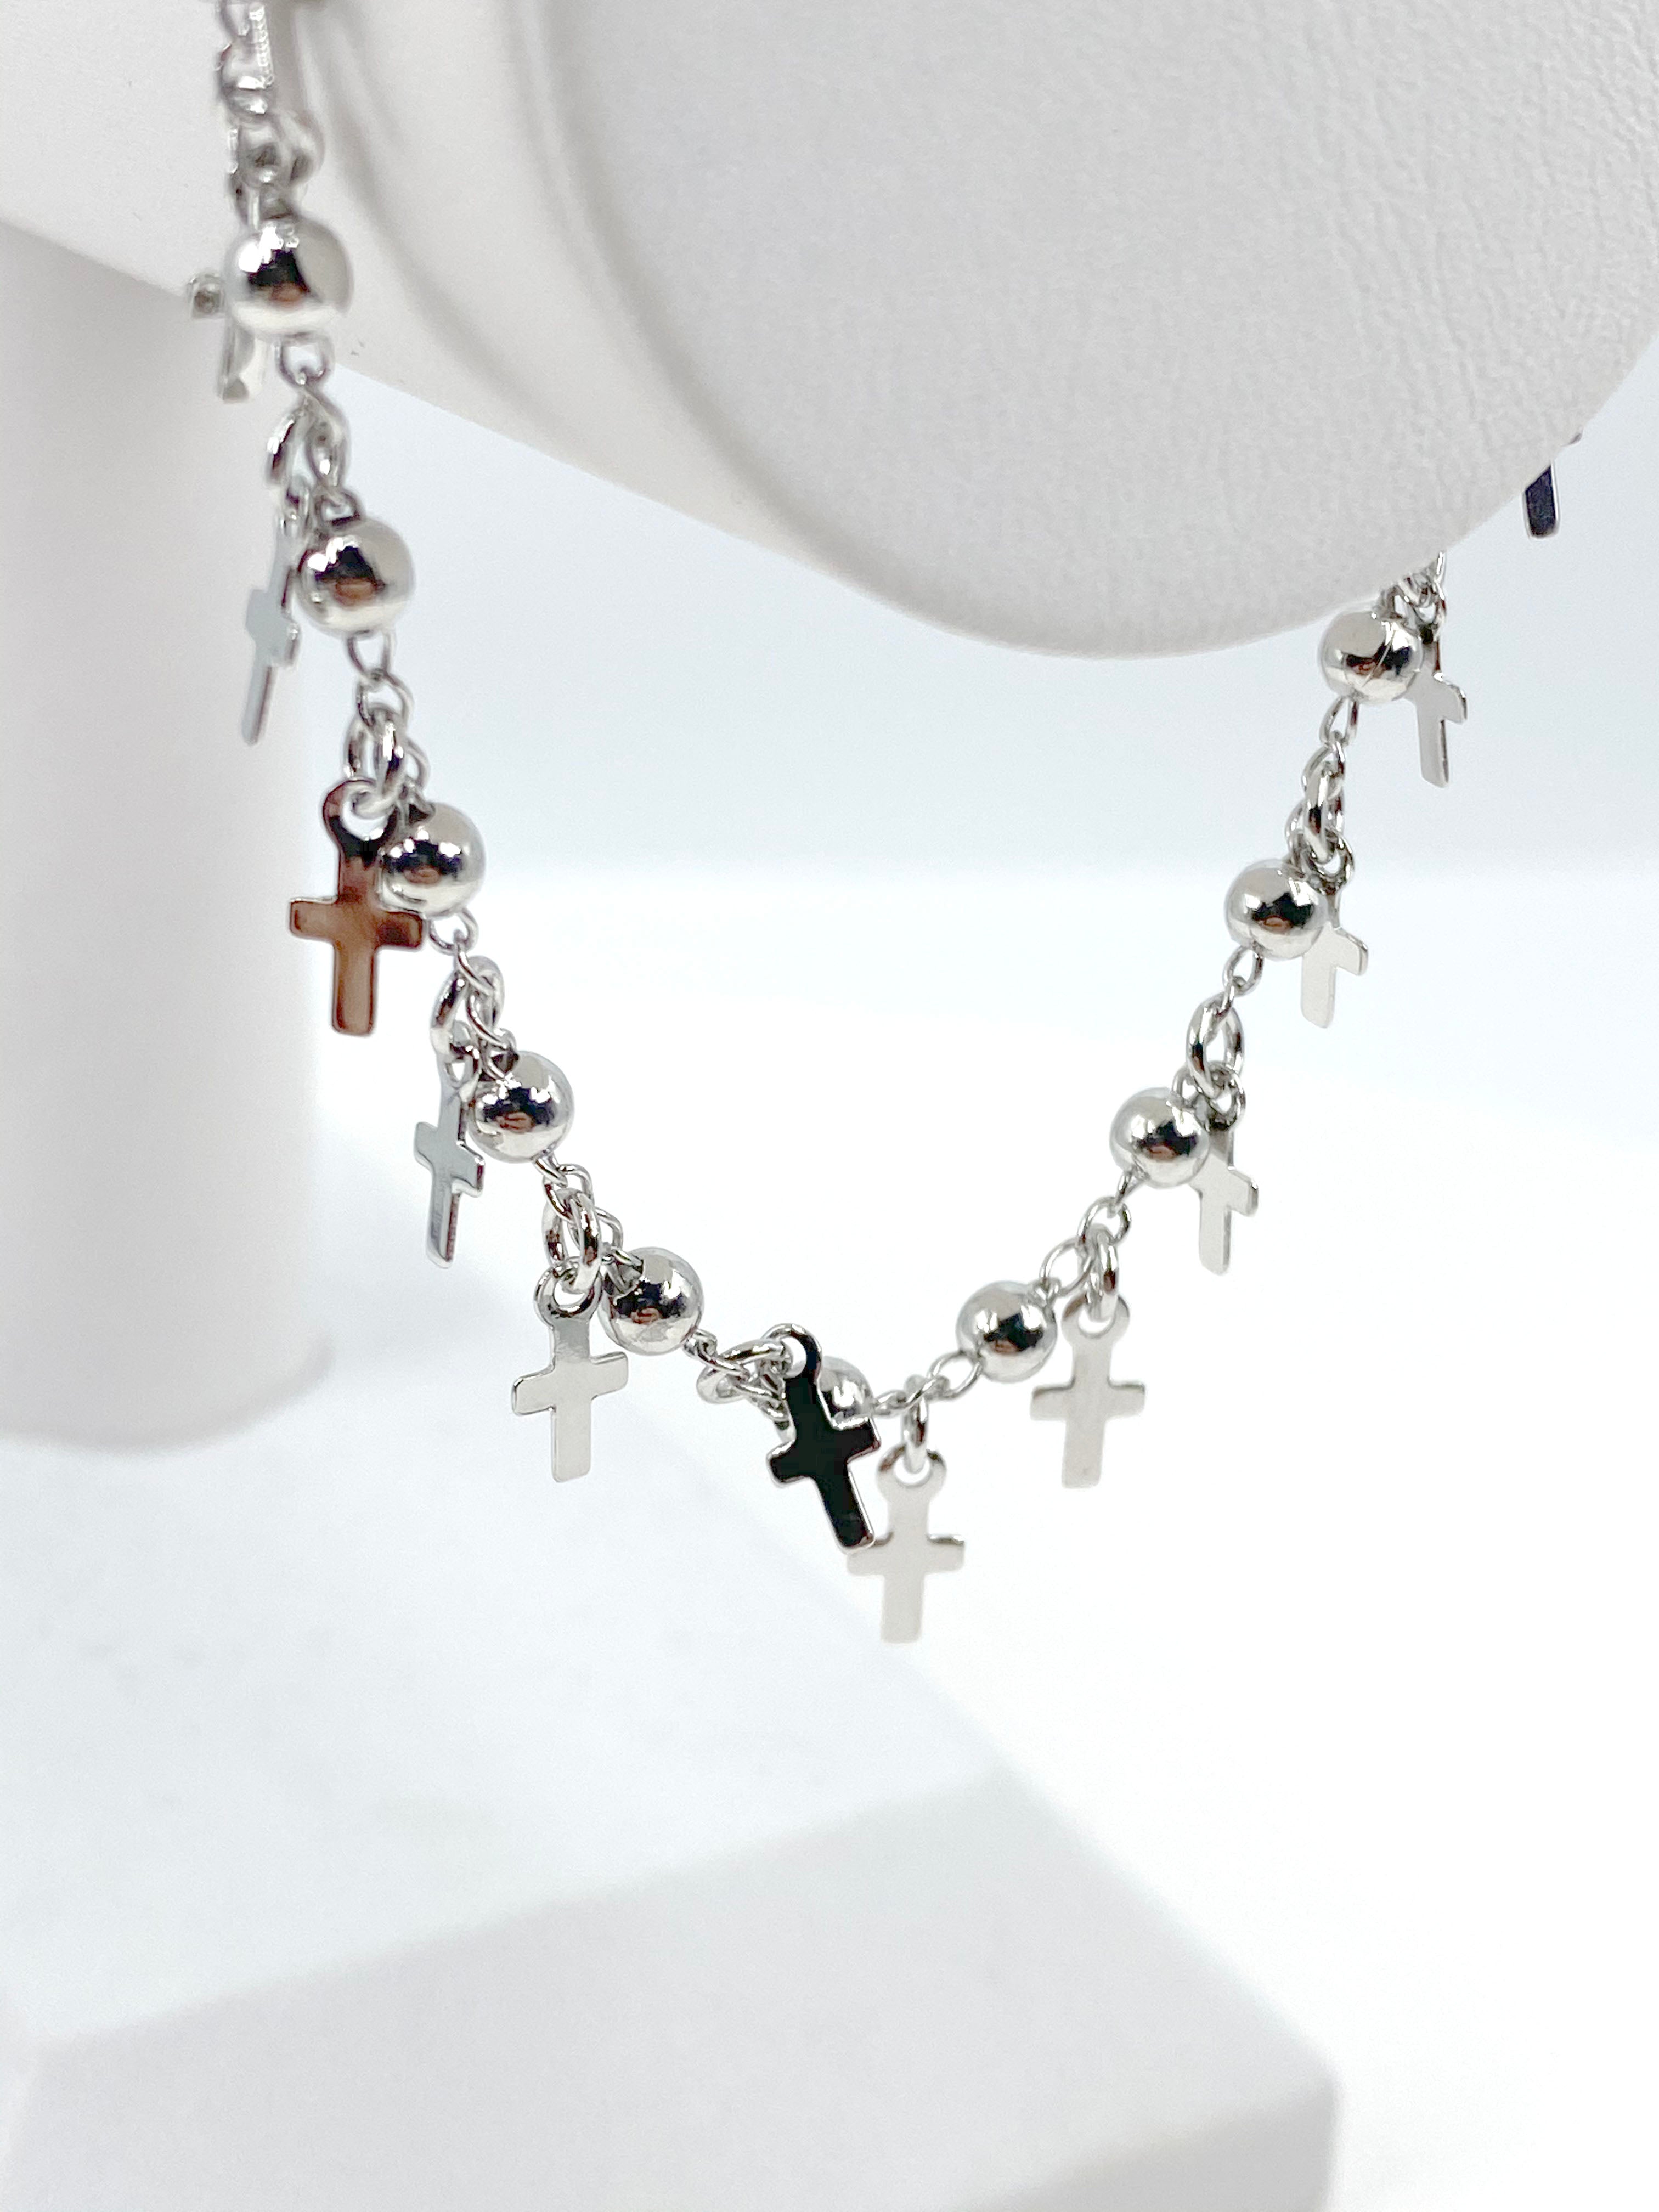 Bracelet with cross charms